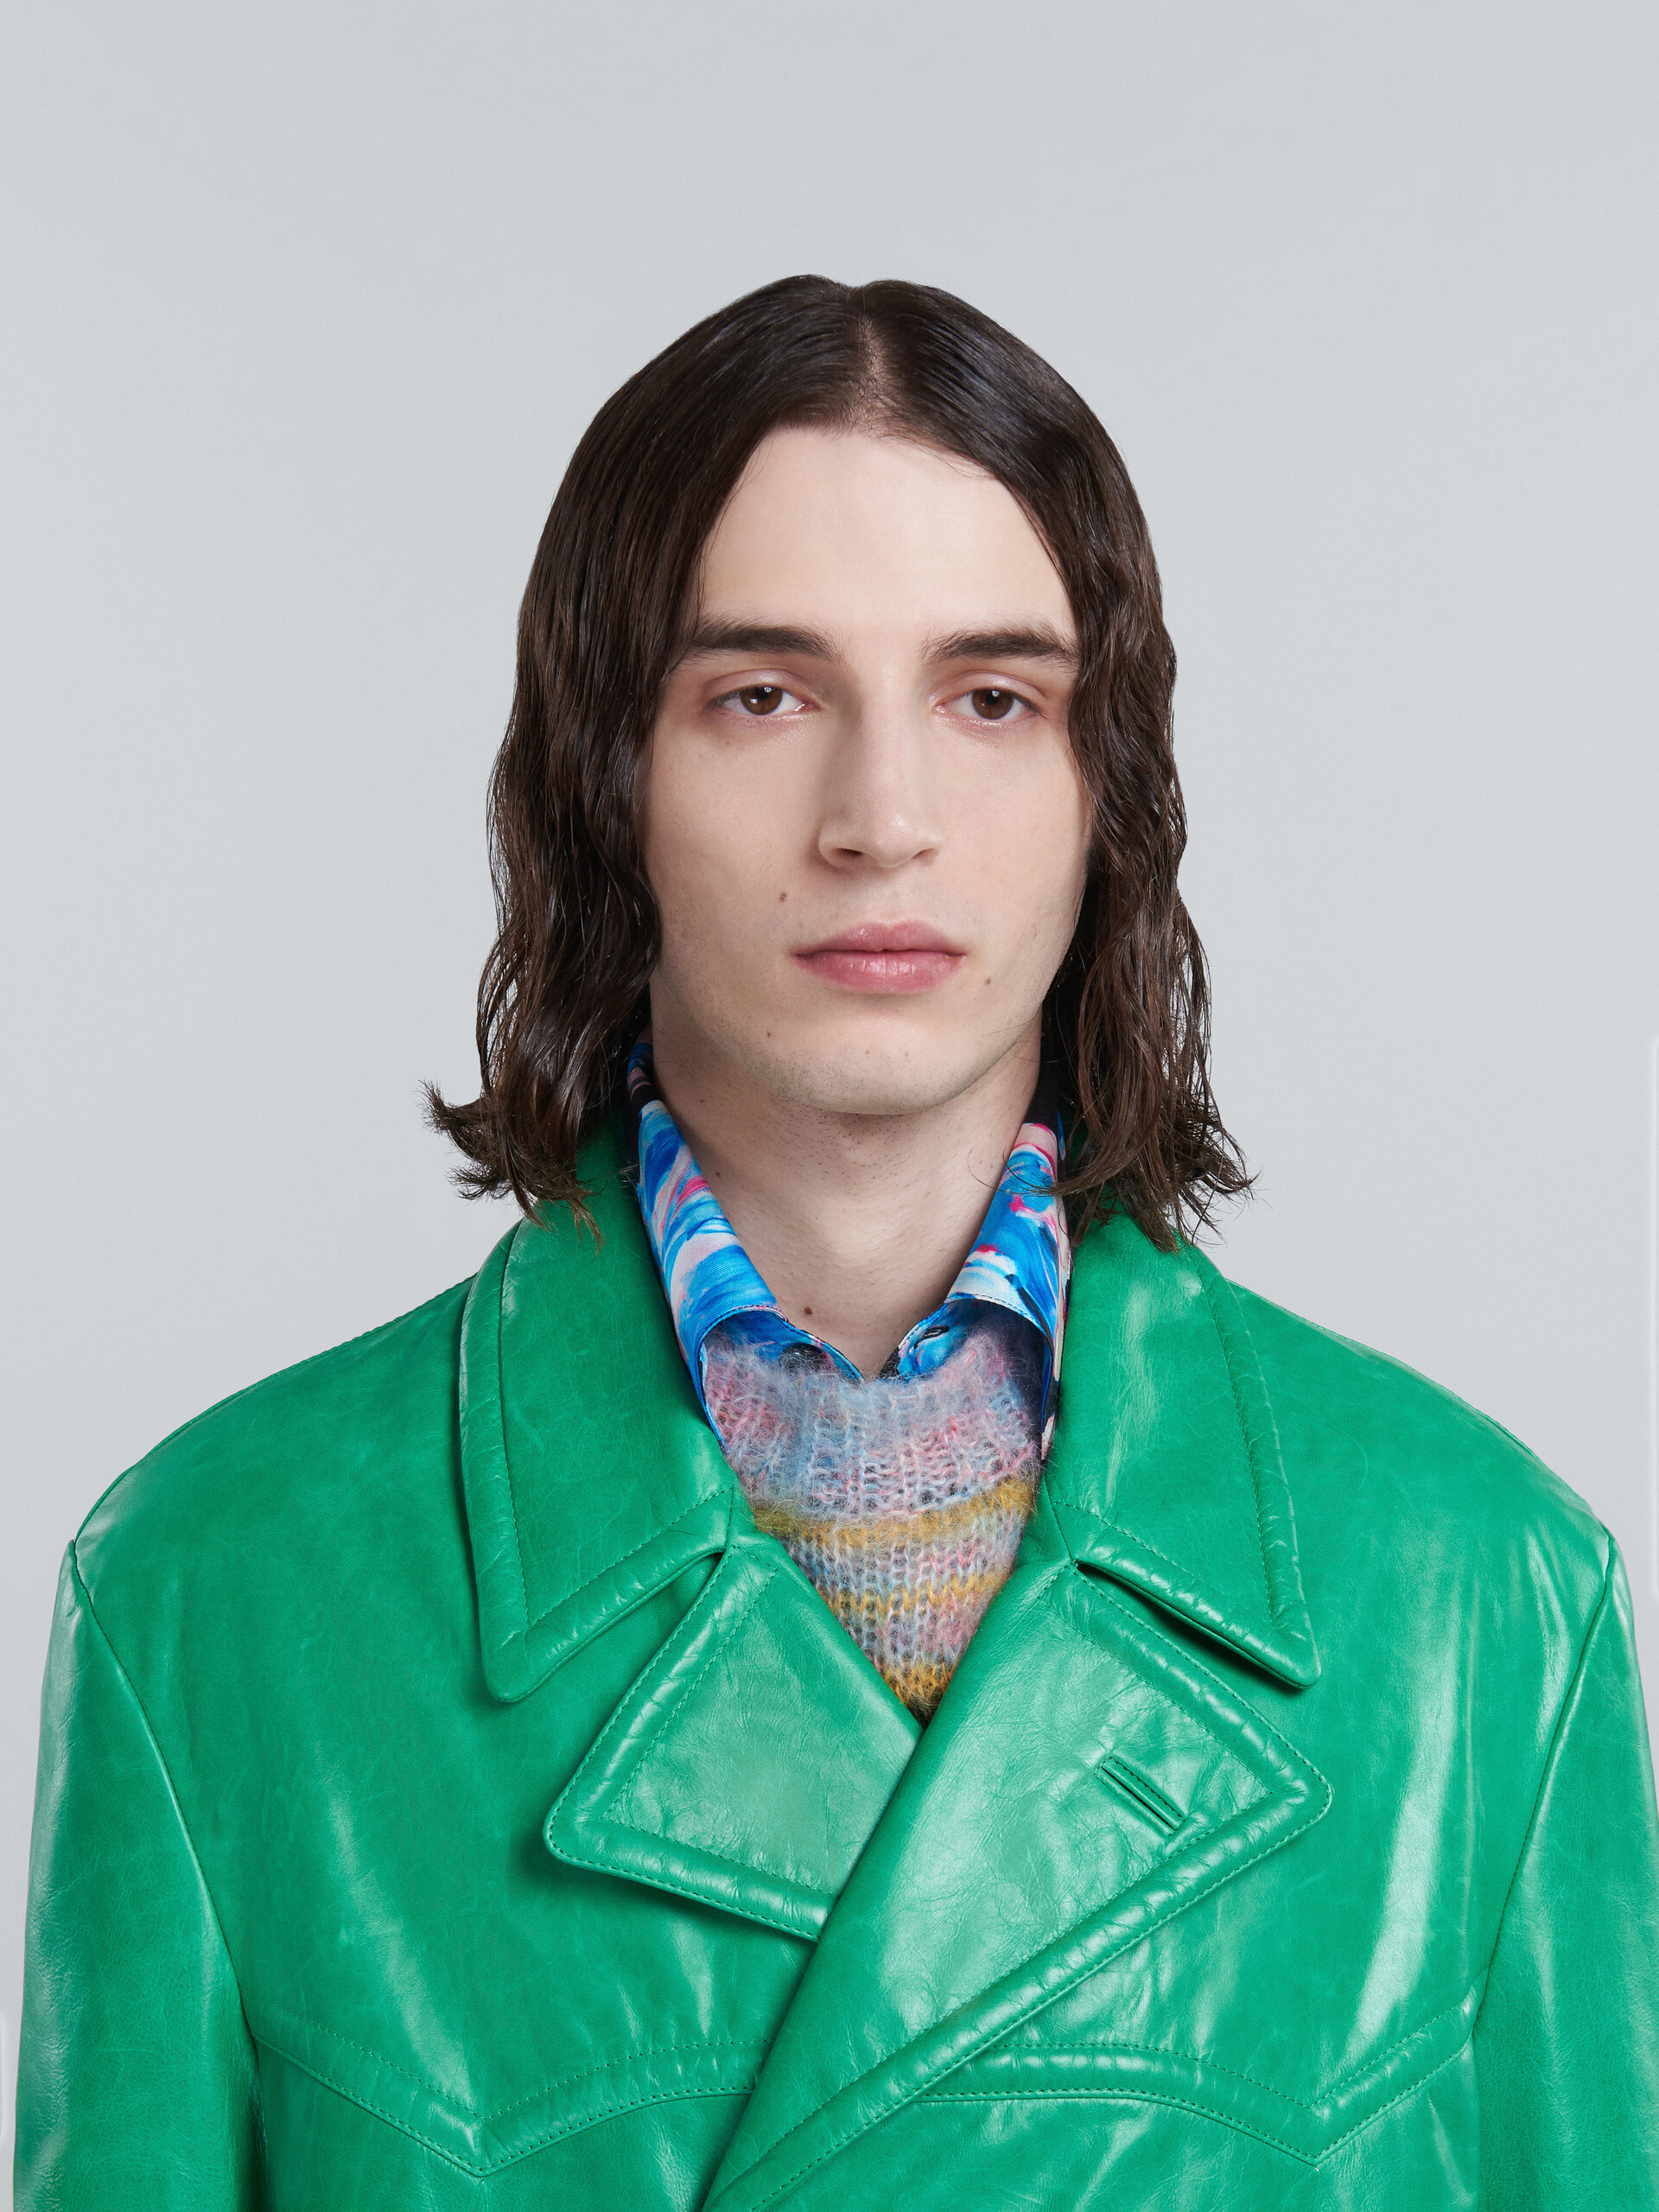 Double-breasted jacket in shiny green leather - Coats - Image 4